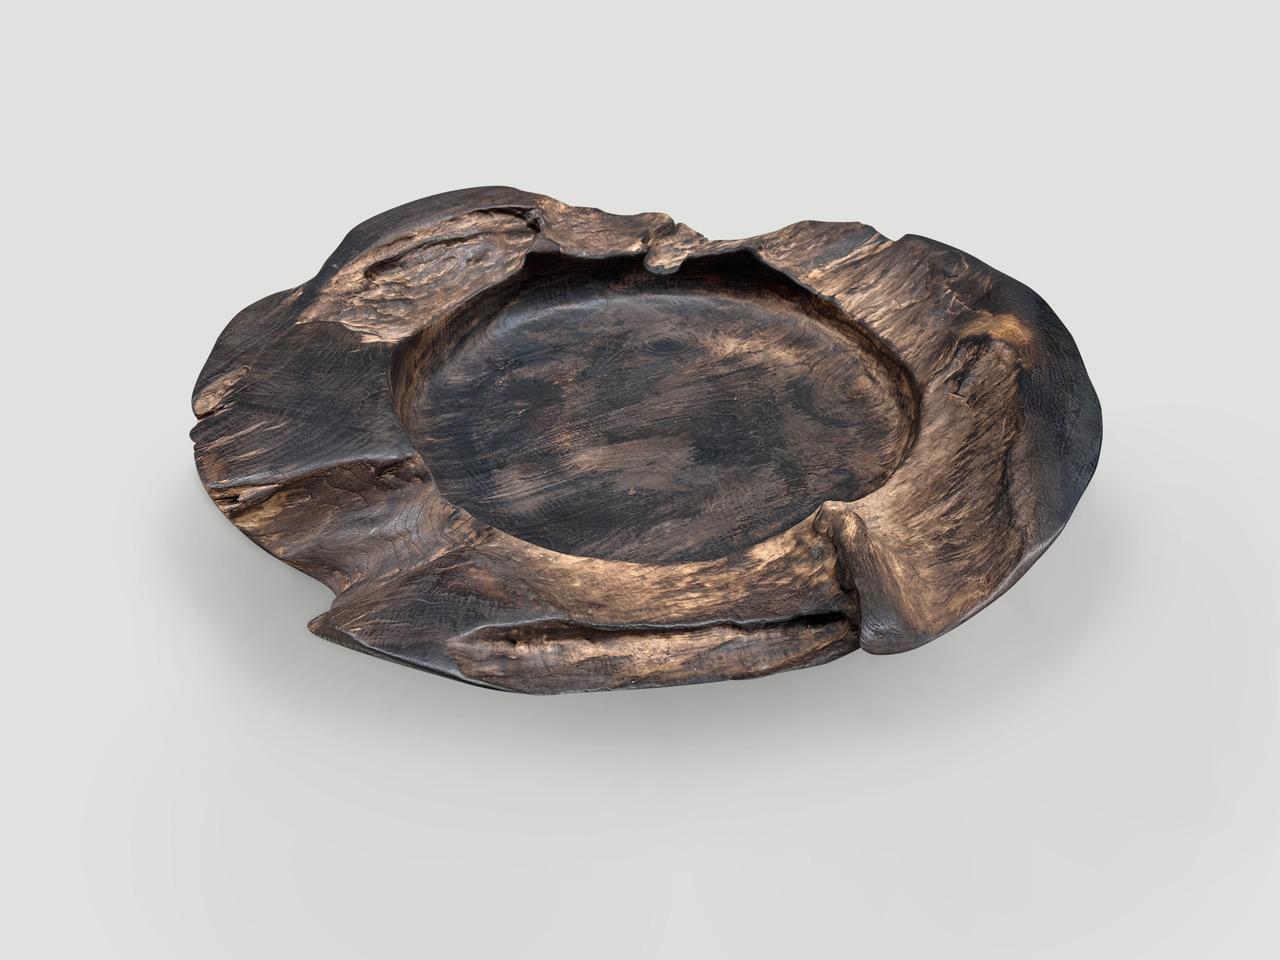 Contemporary Andrianna Shamaris Oversized Charred Sculptural Teak Wood Vessel For Sale